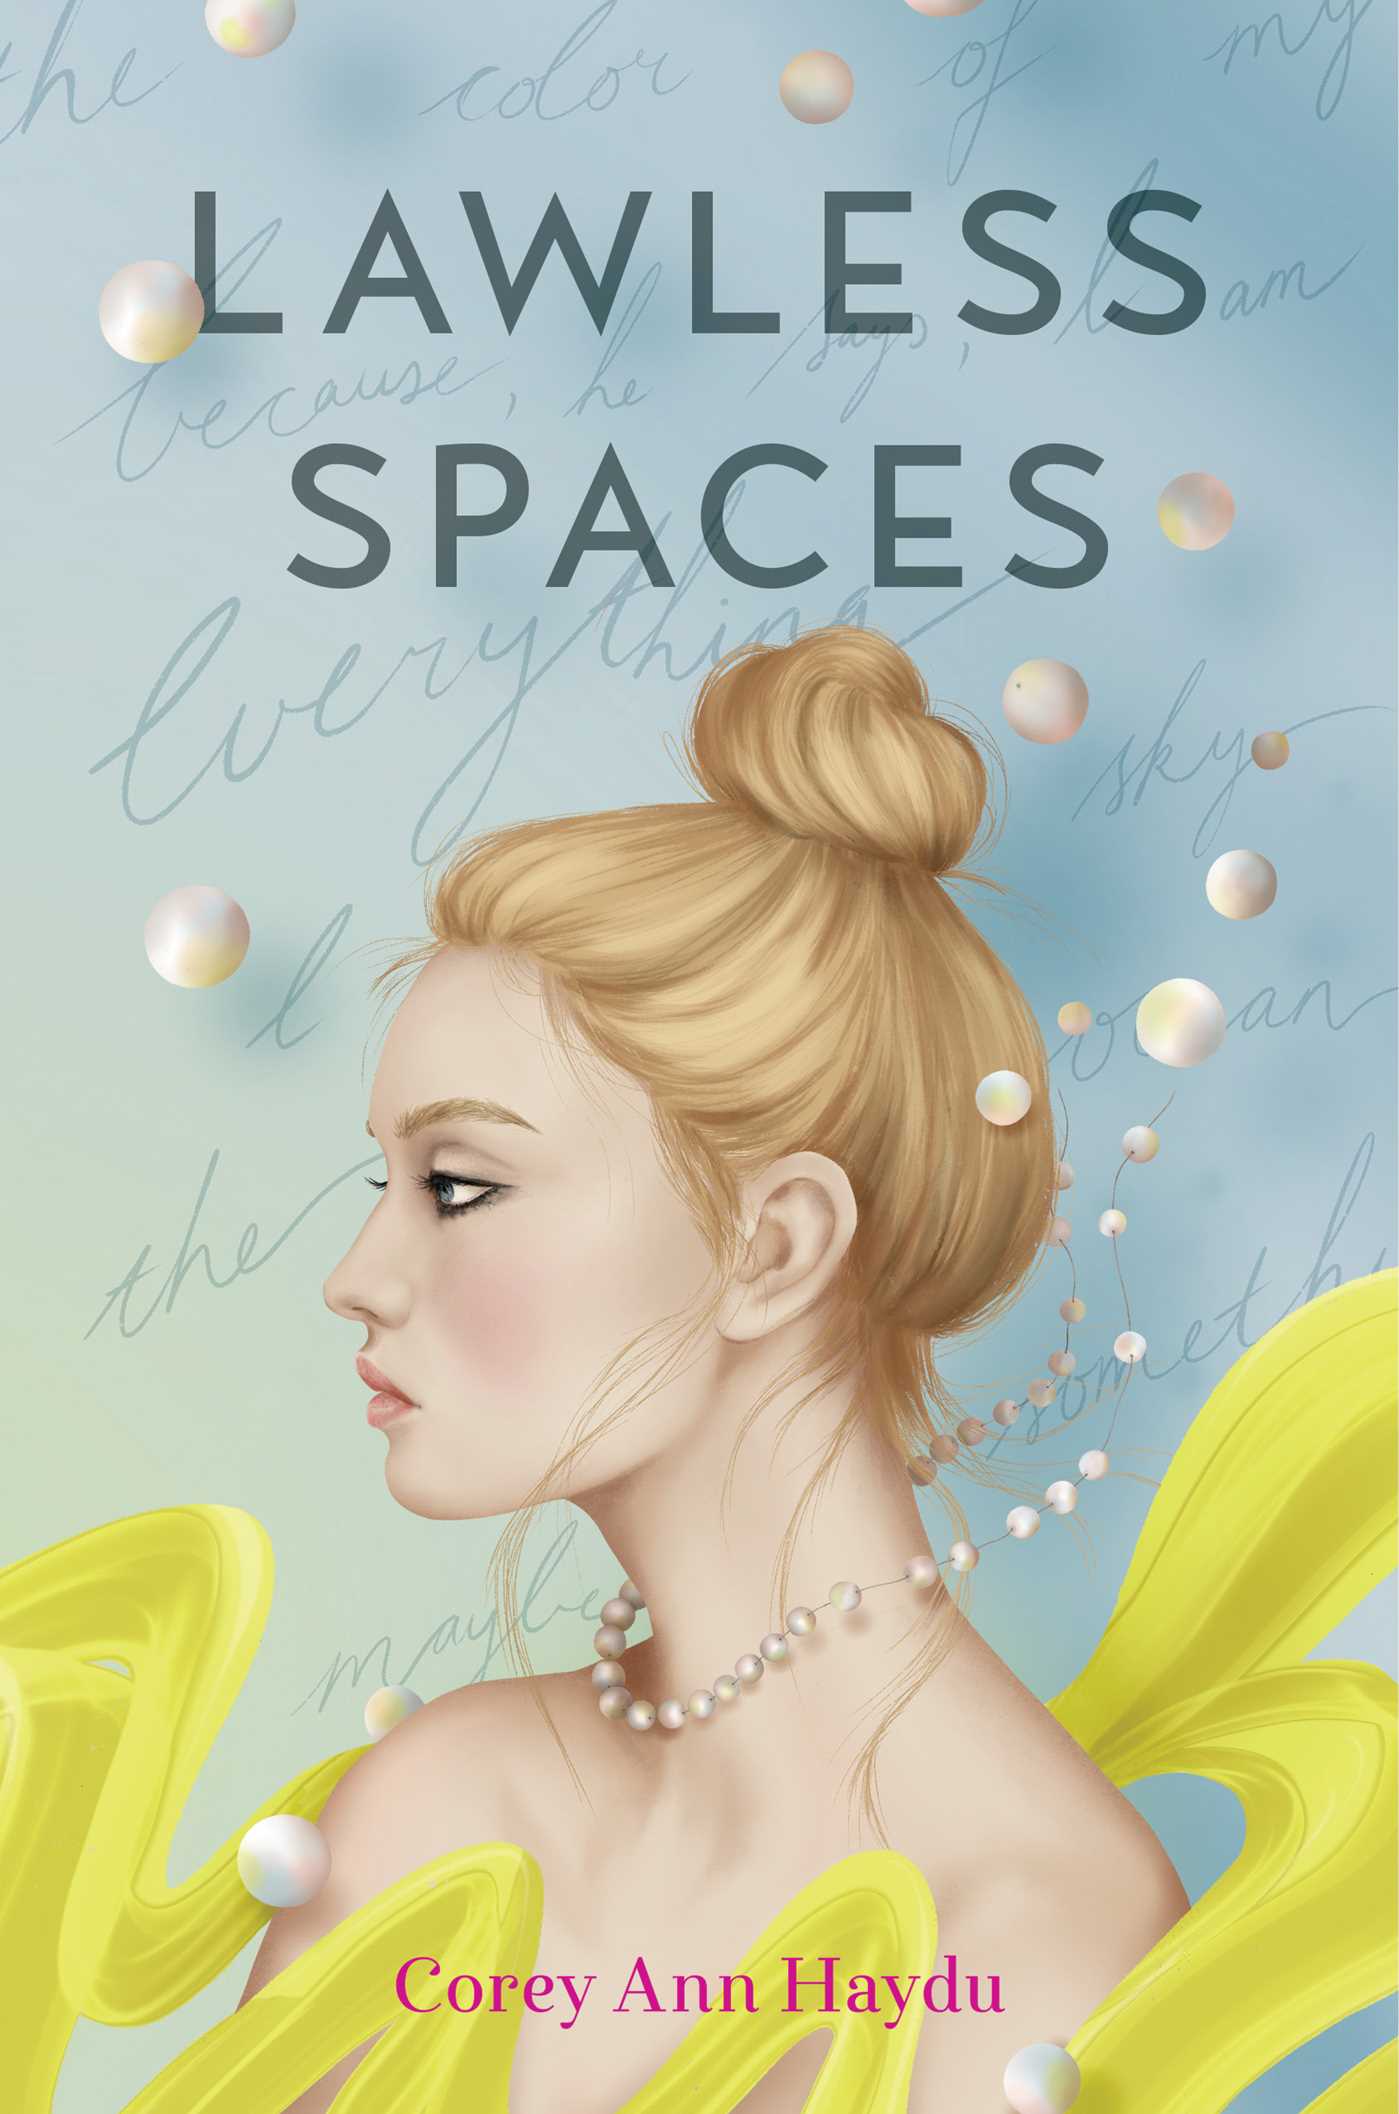 Cover image for "Lawless Spaces"